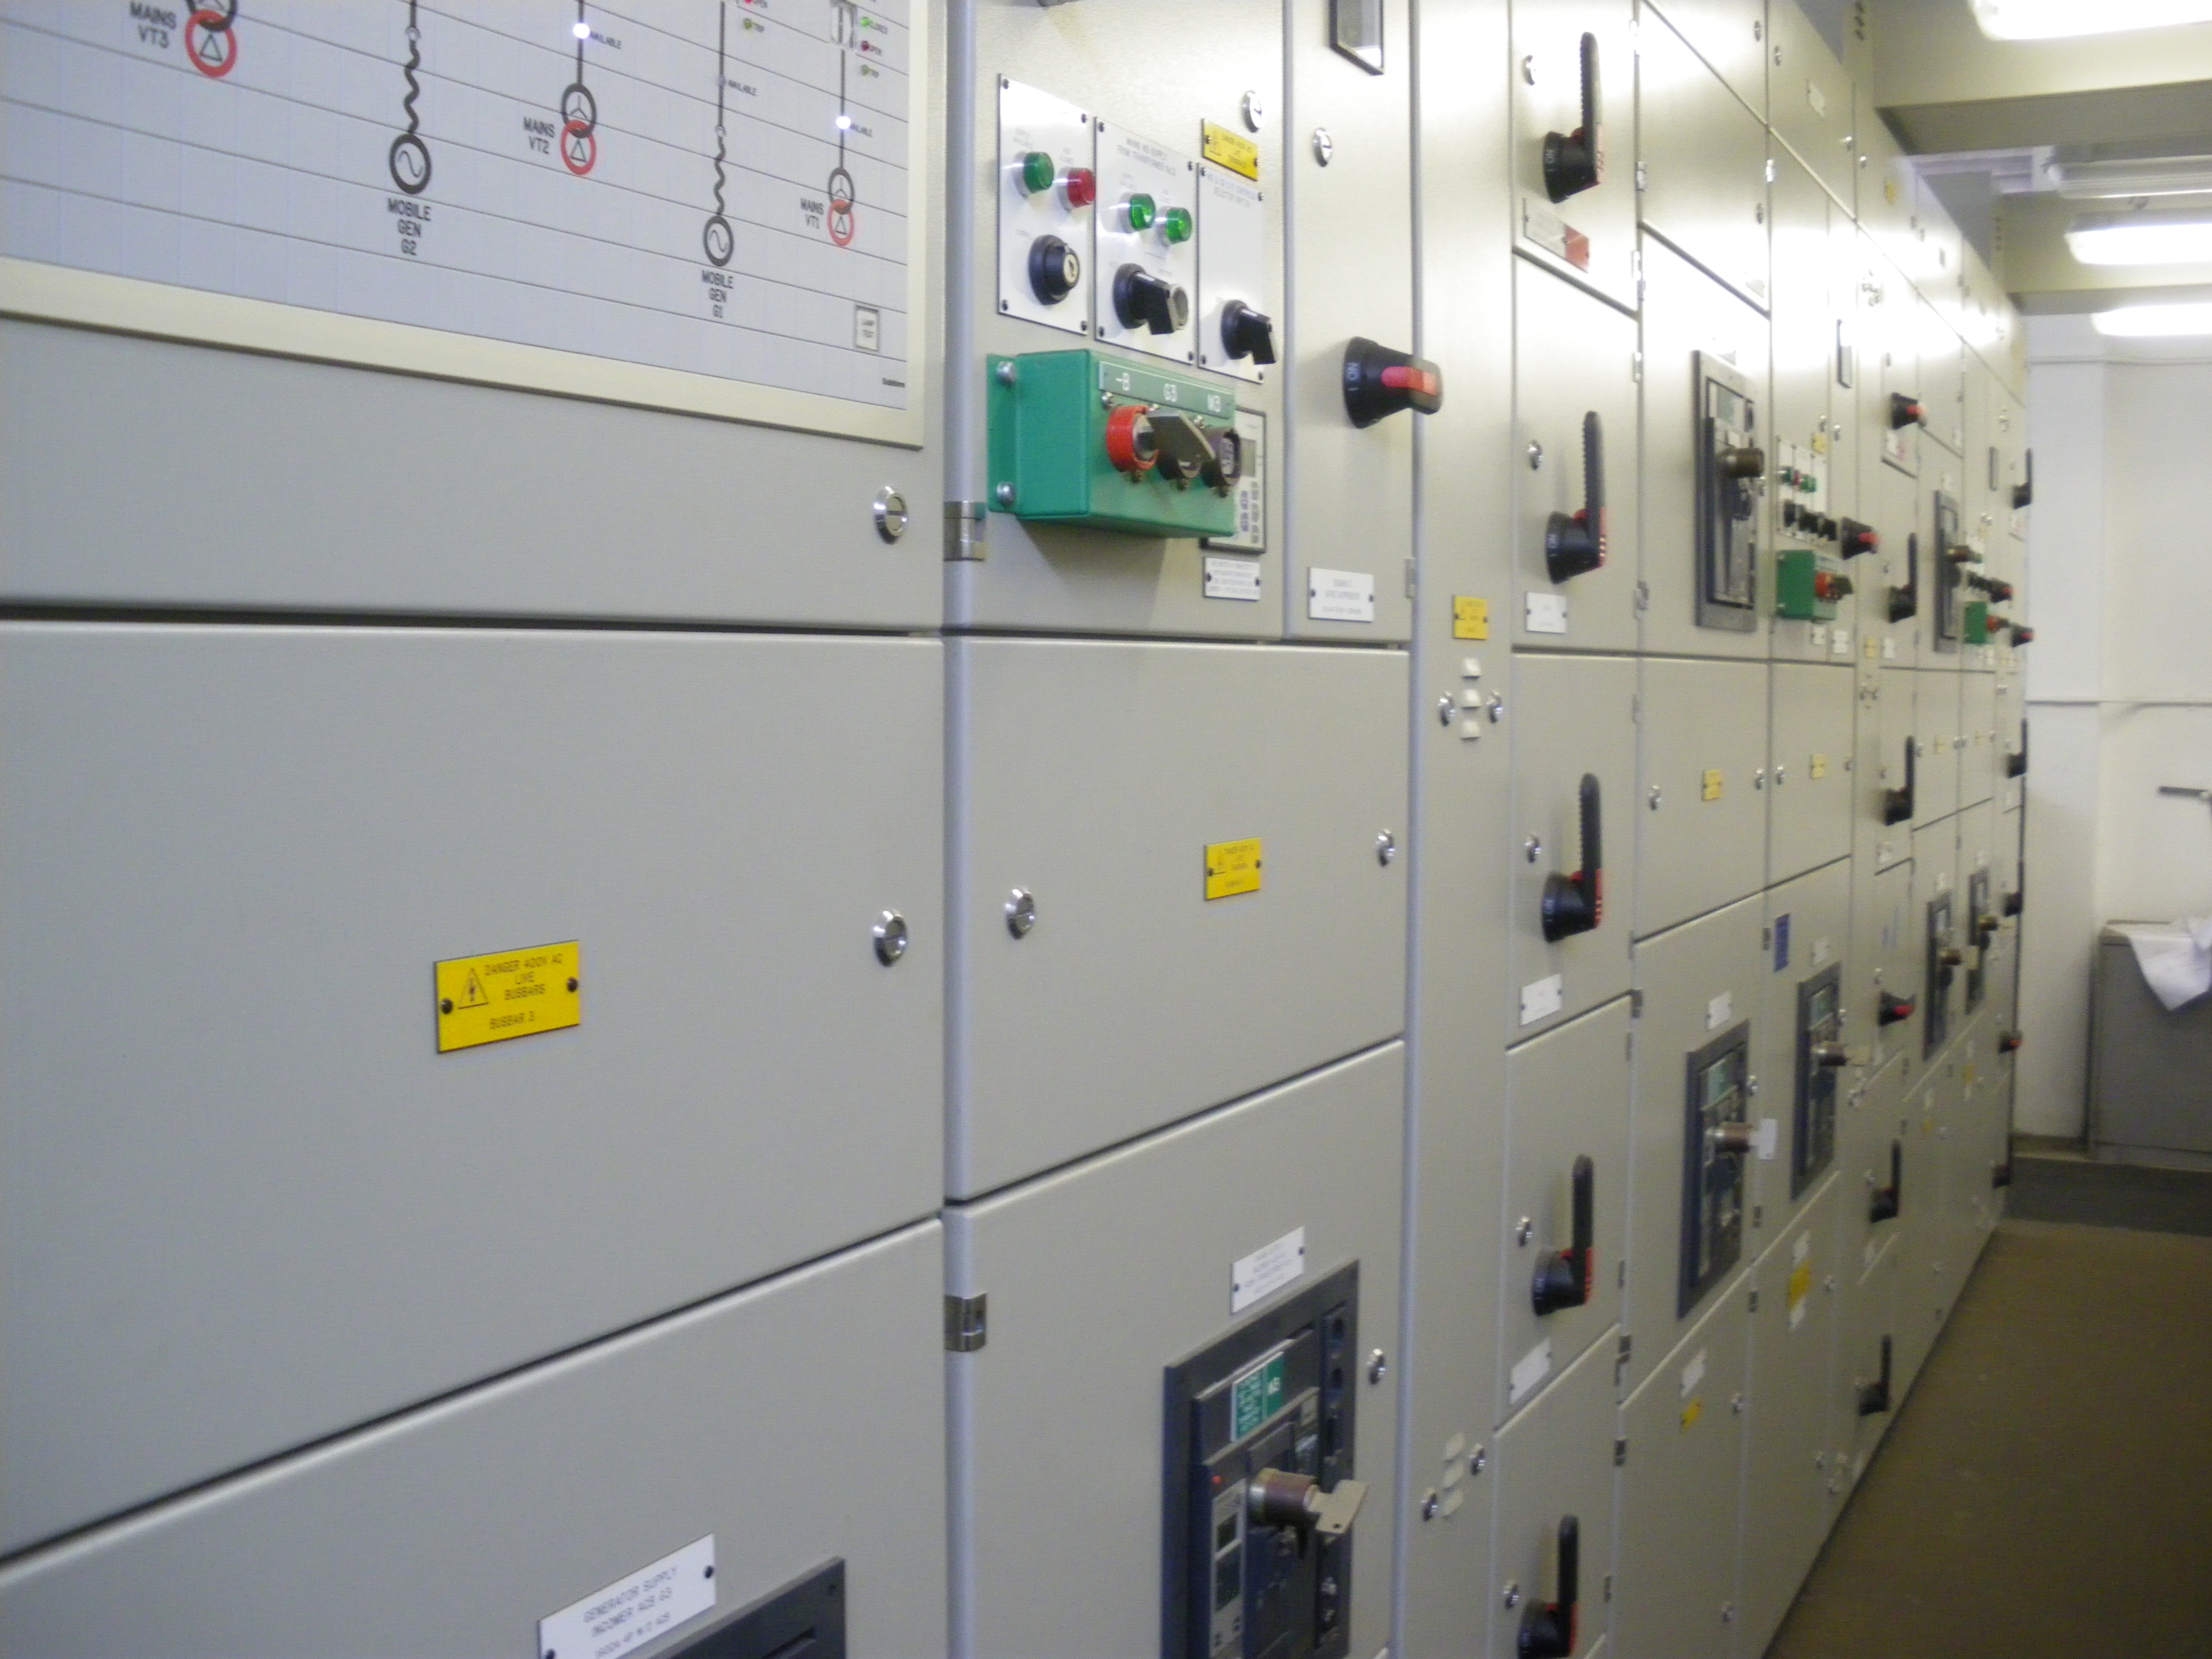 New low voltage distribution board (Substation)